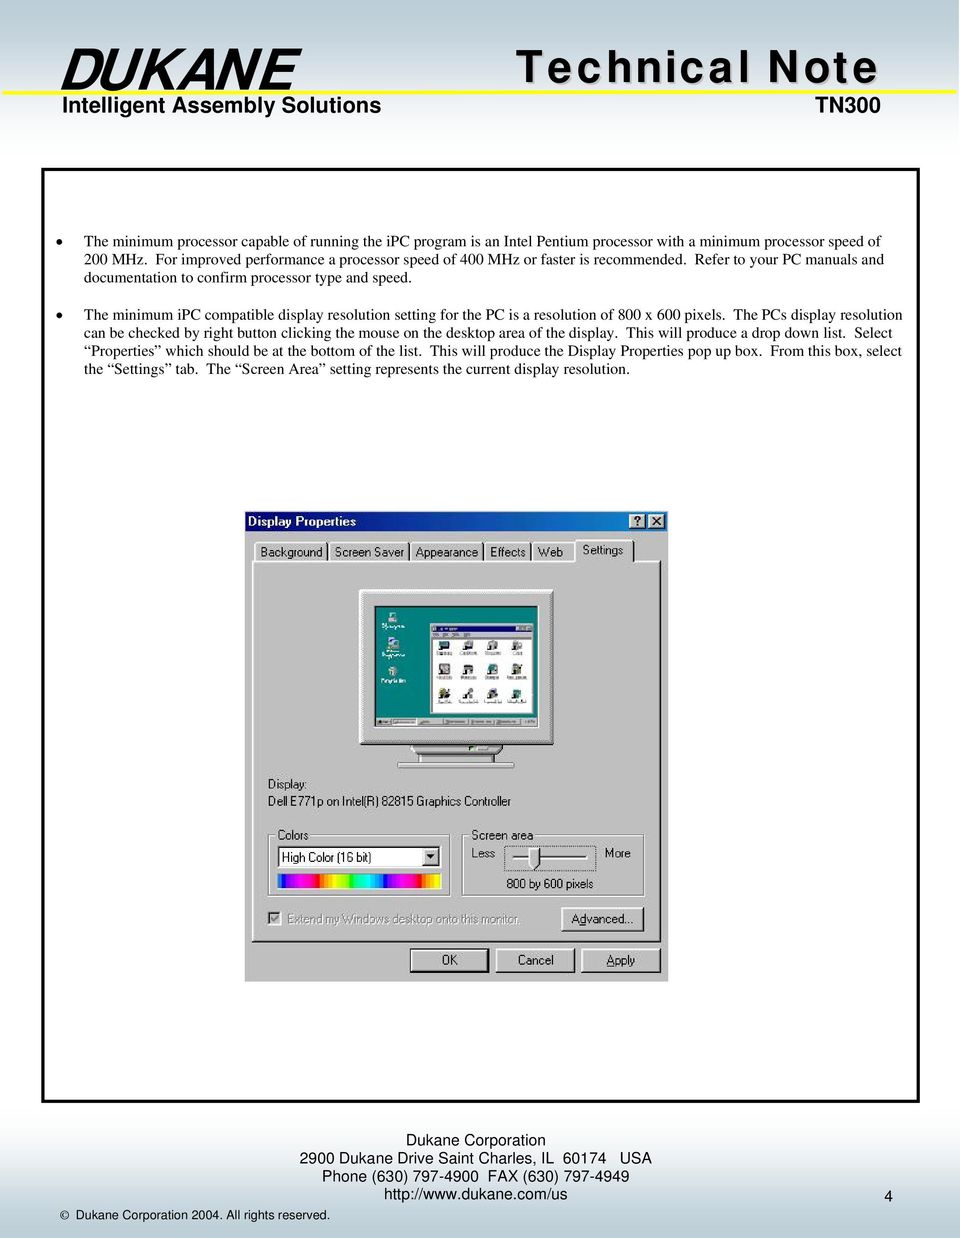 The minimum ipc compatible display resolution setting for the PC is a resolution of 800 x 600 pixels.